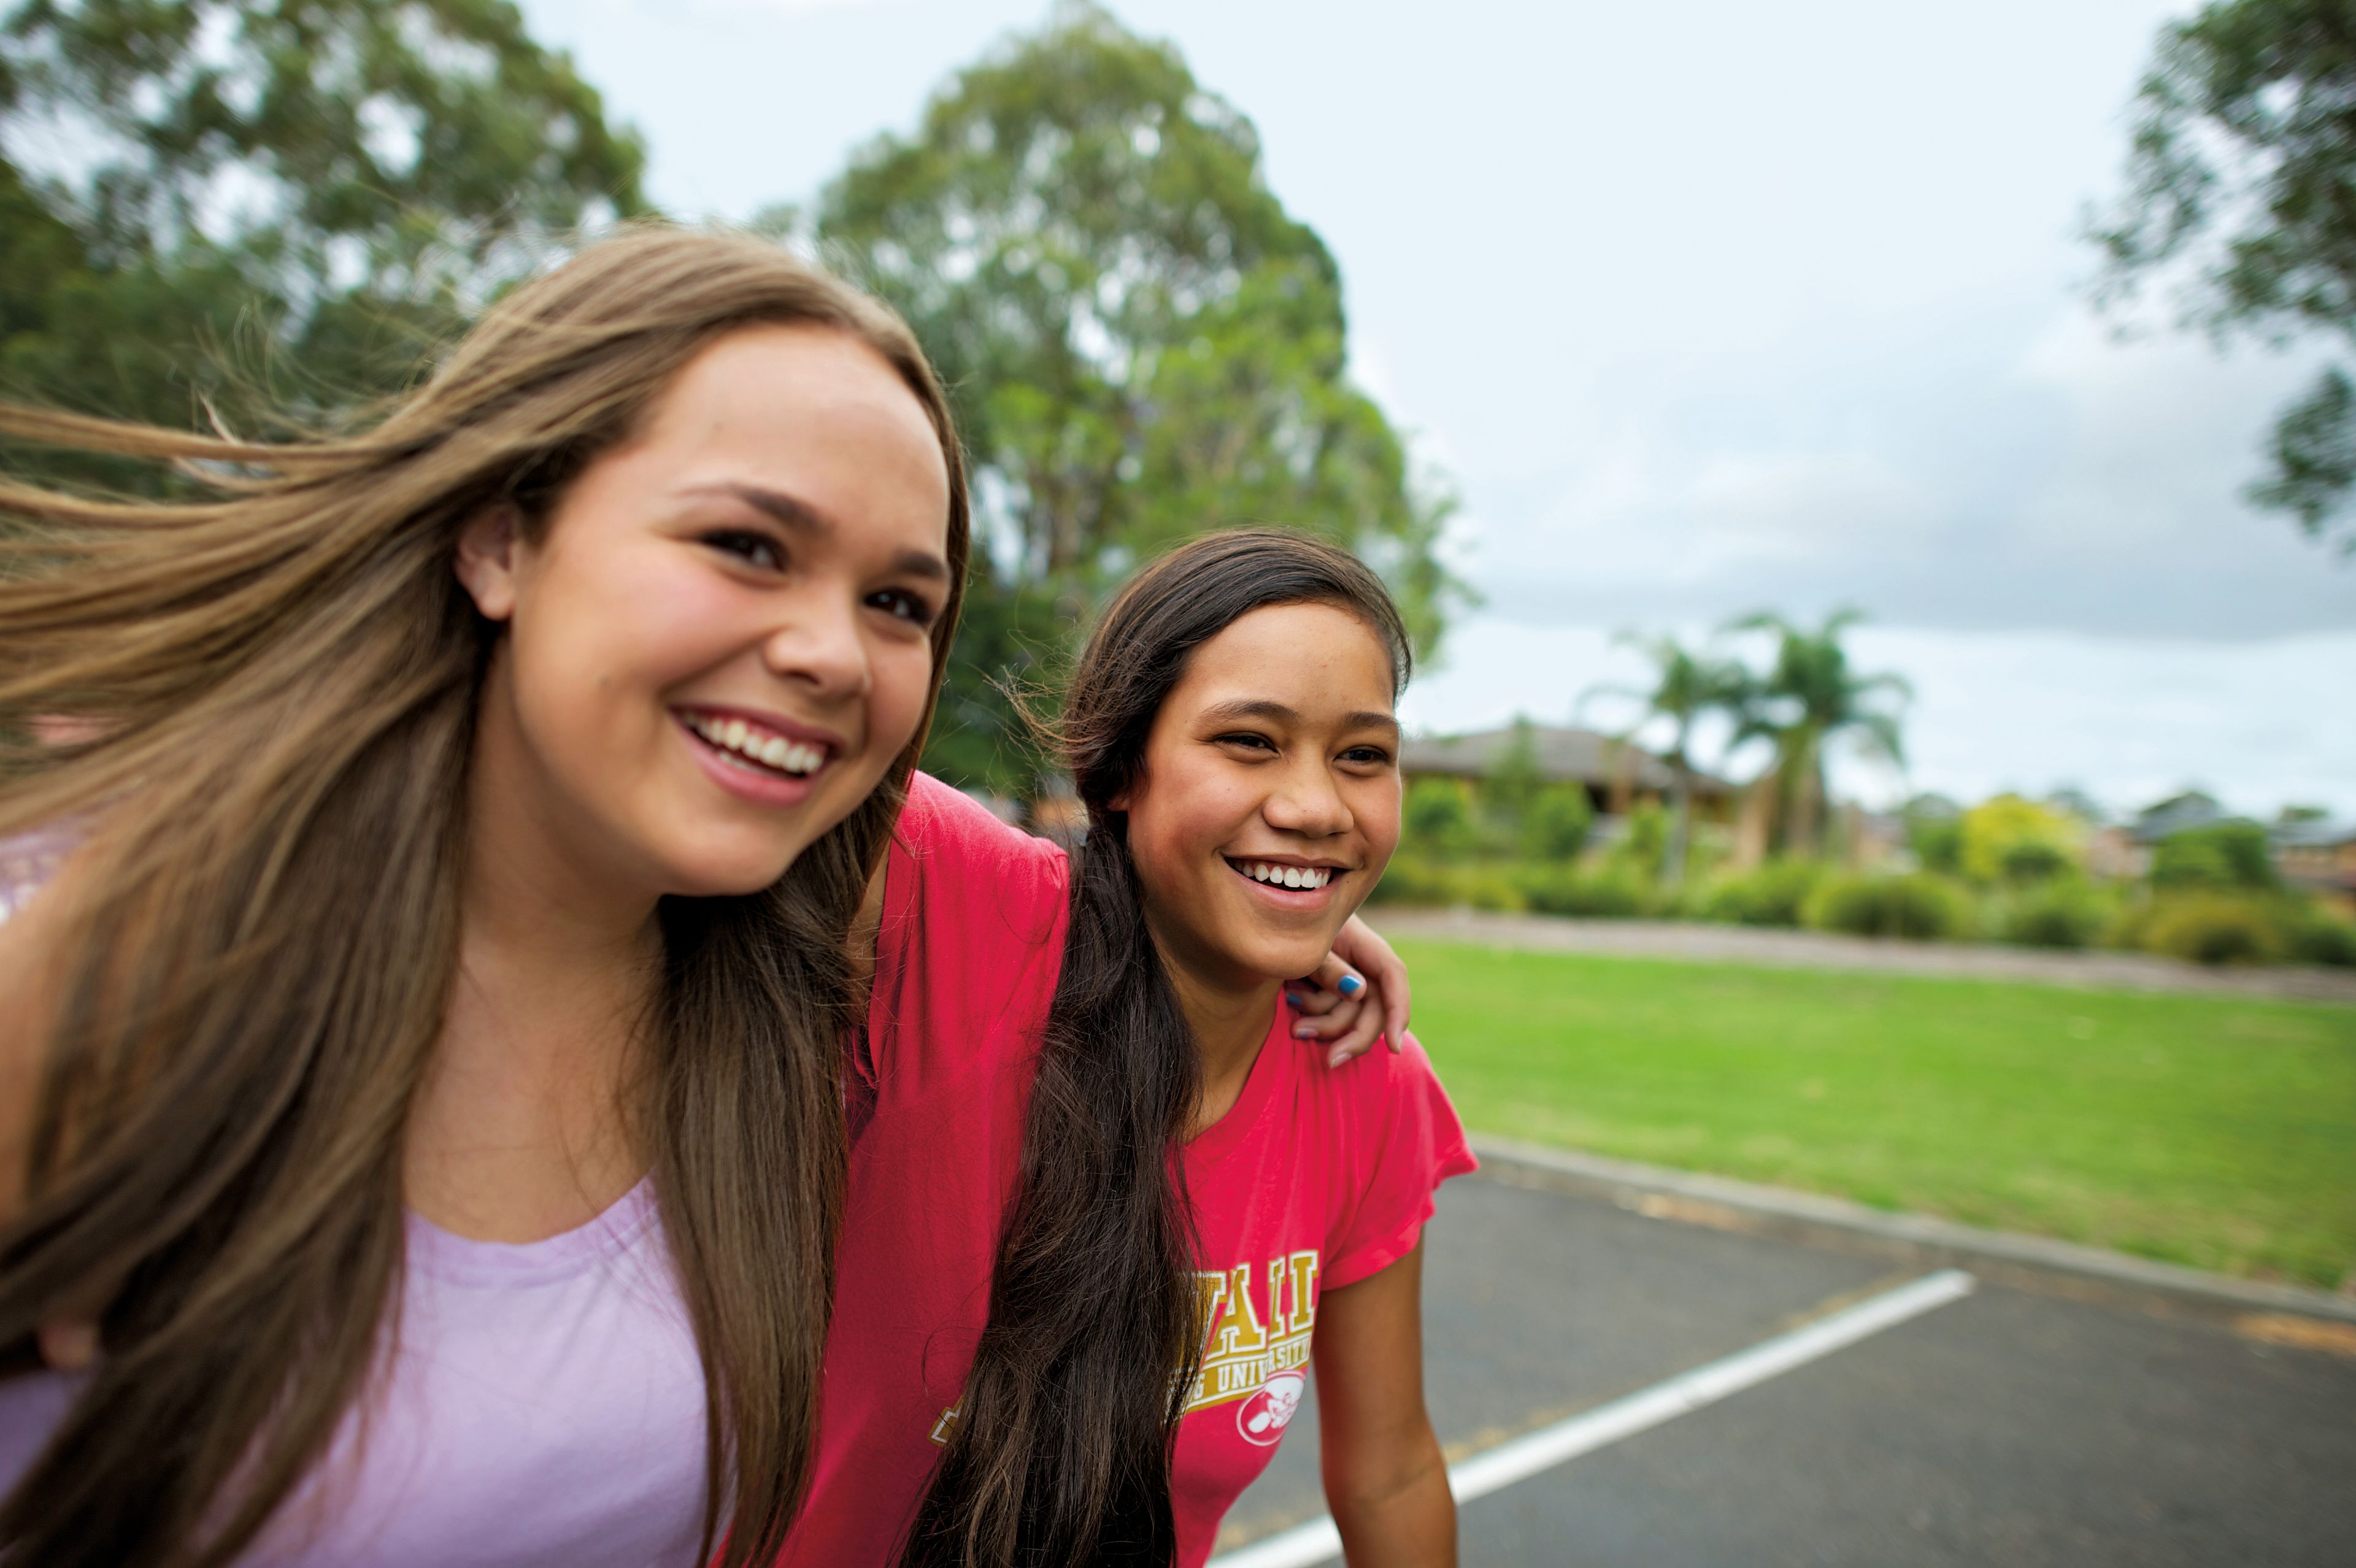 Two young women walk outside with their arms around each other’s shoulders, smiling.